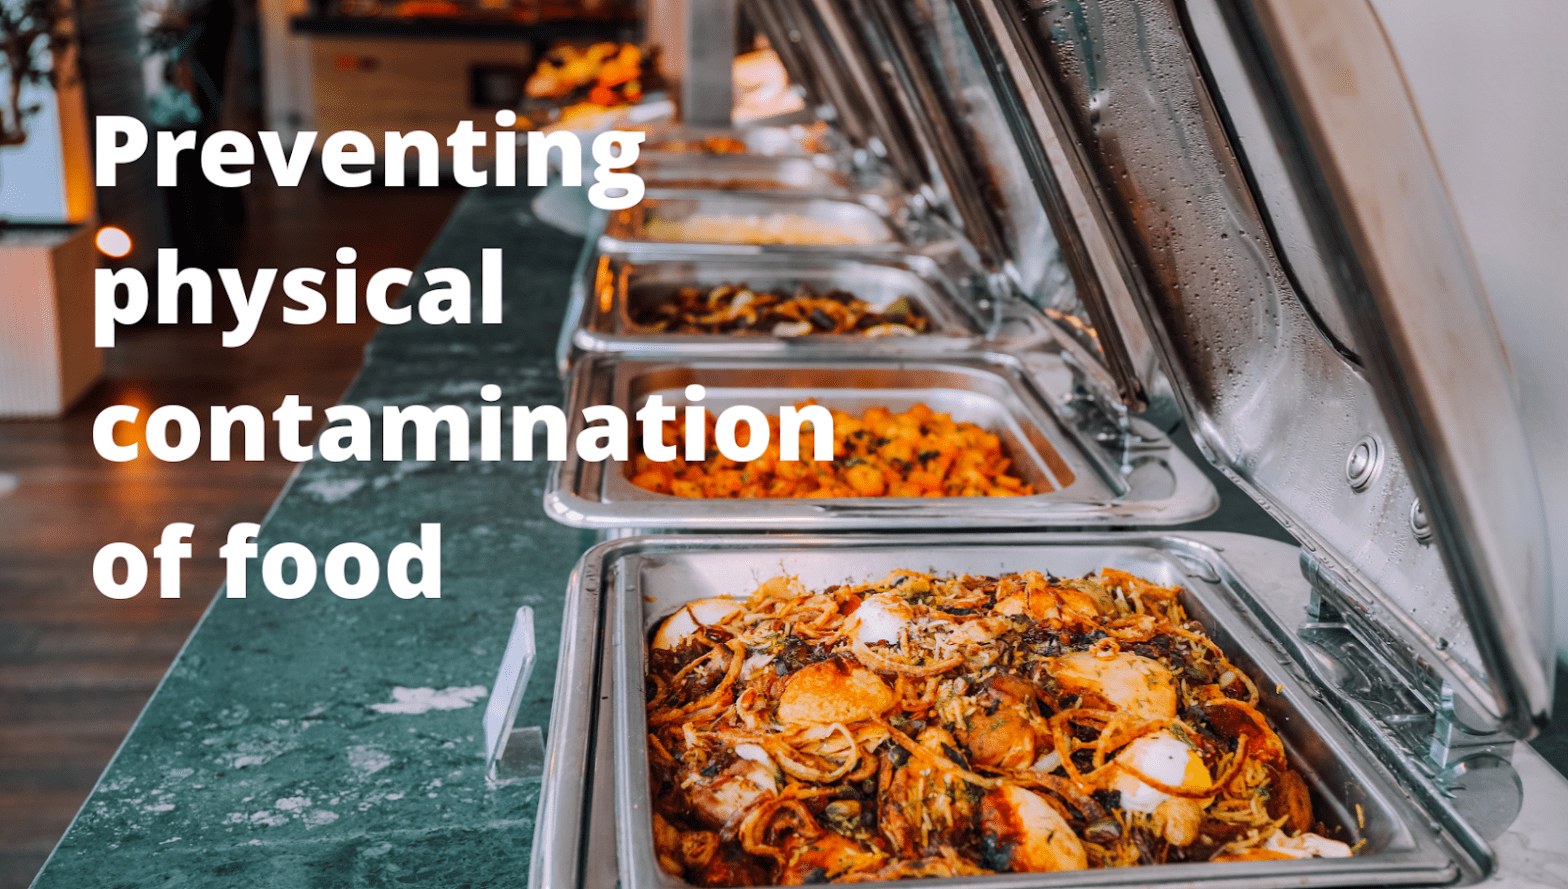 Preventing physical contamination of food